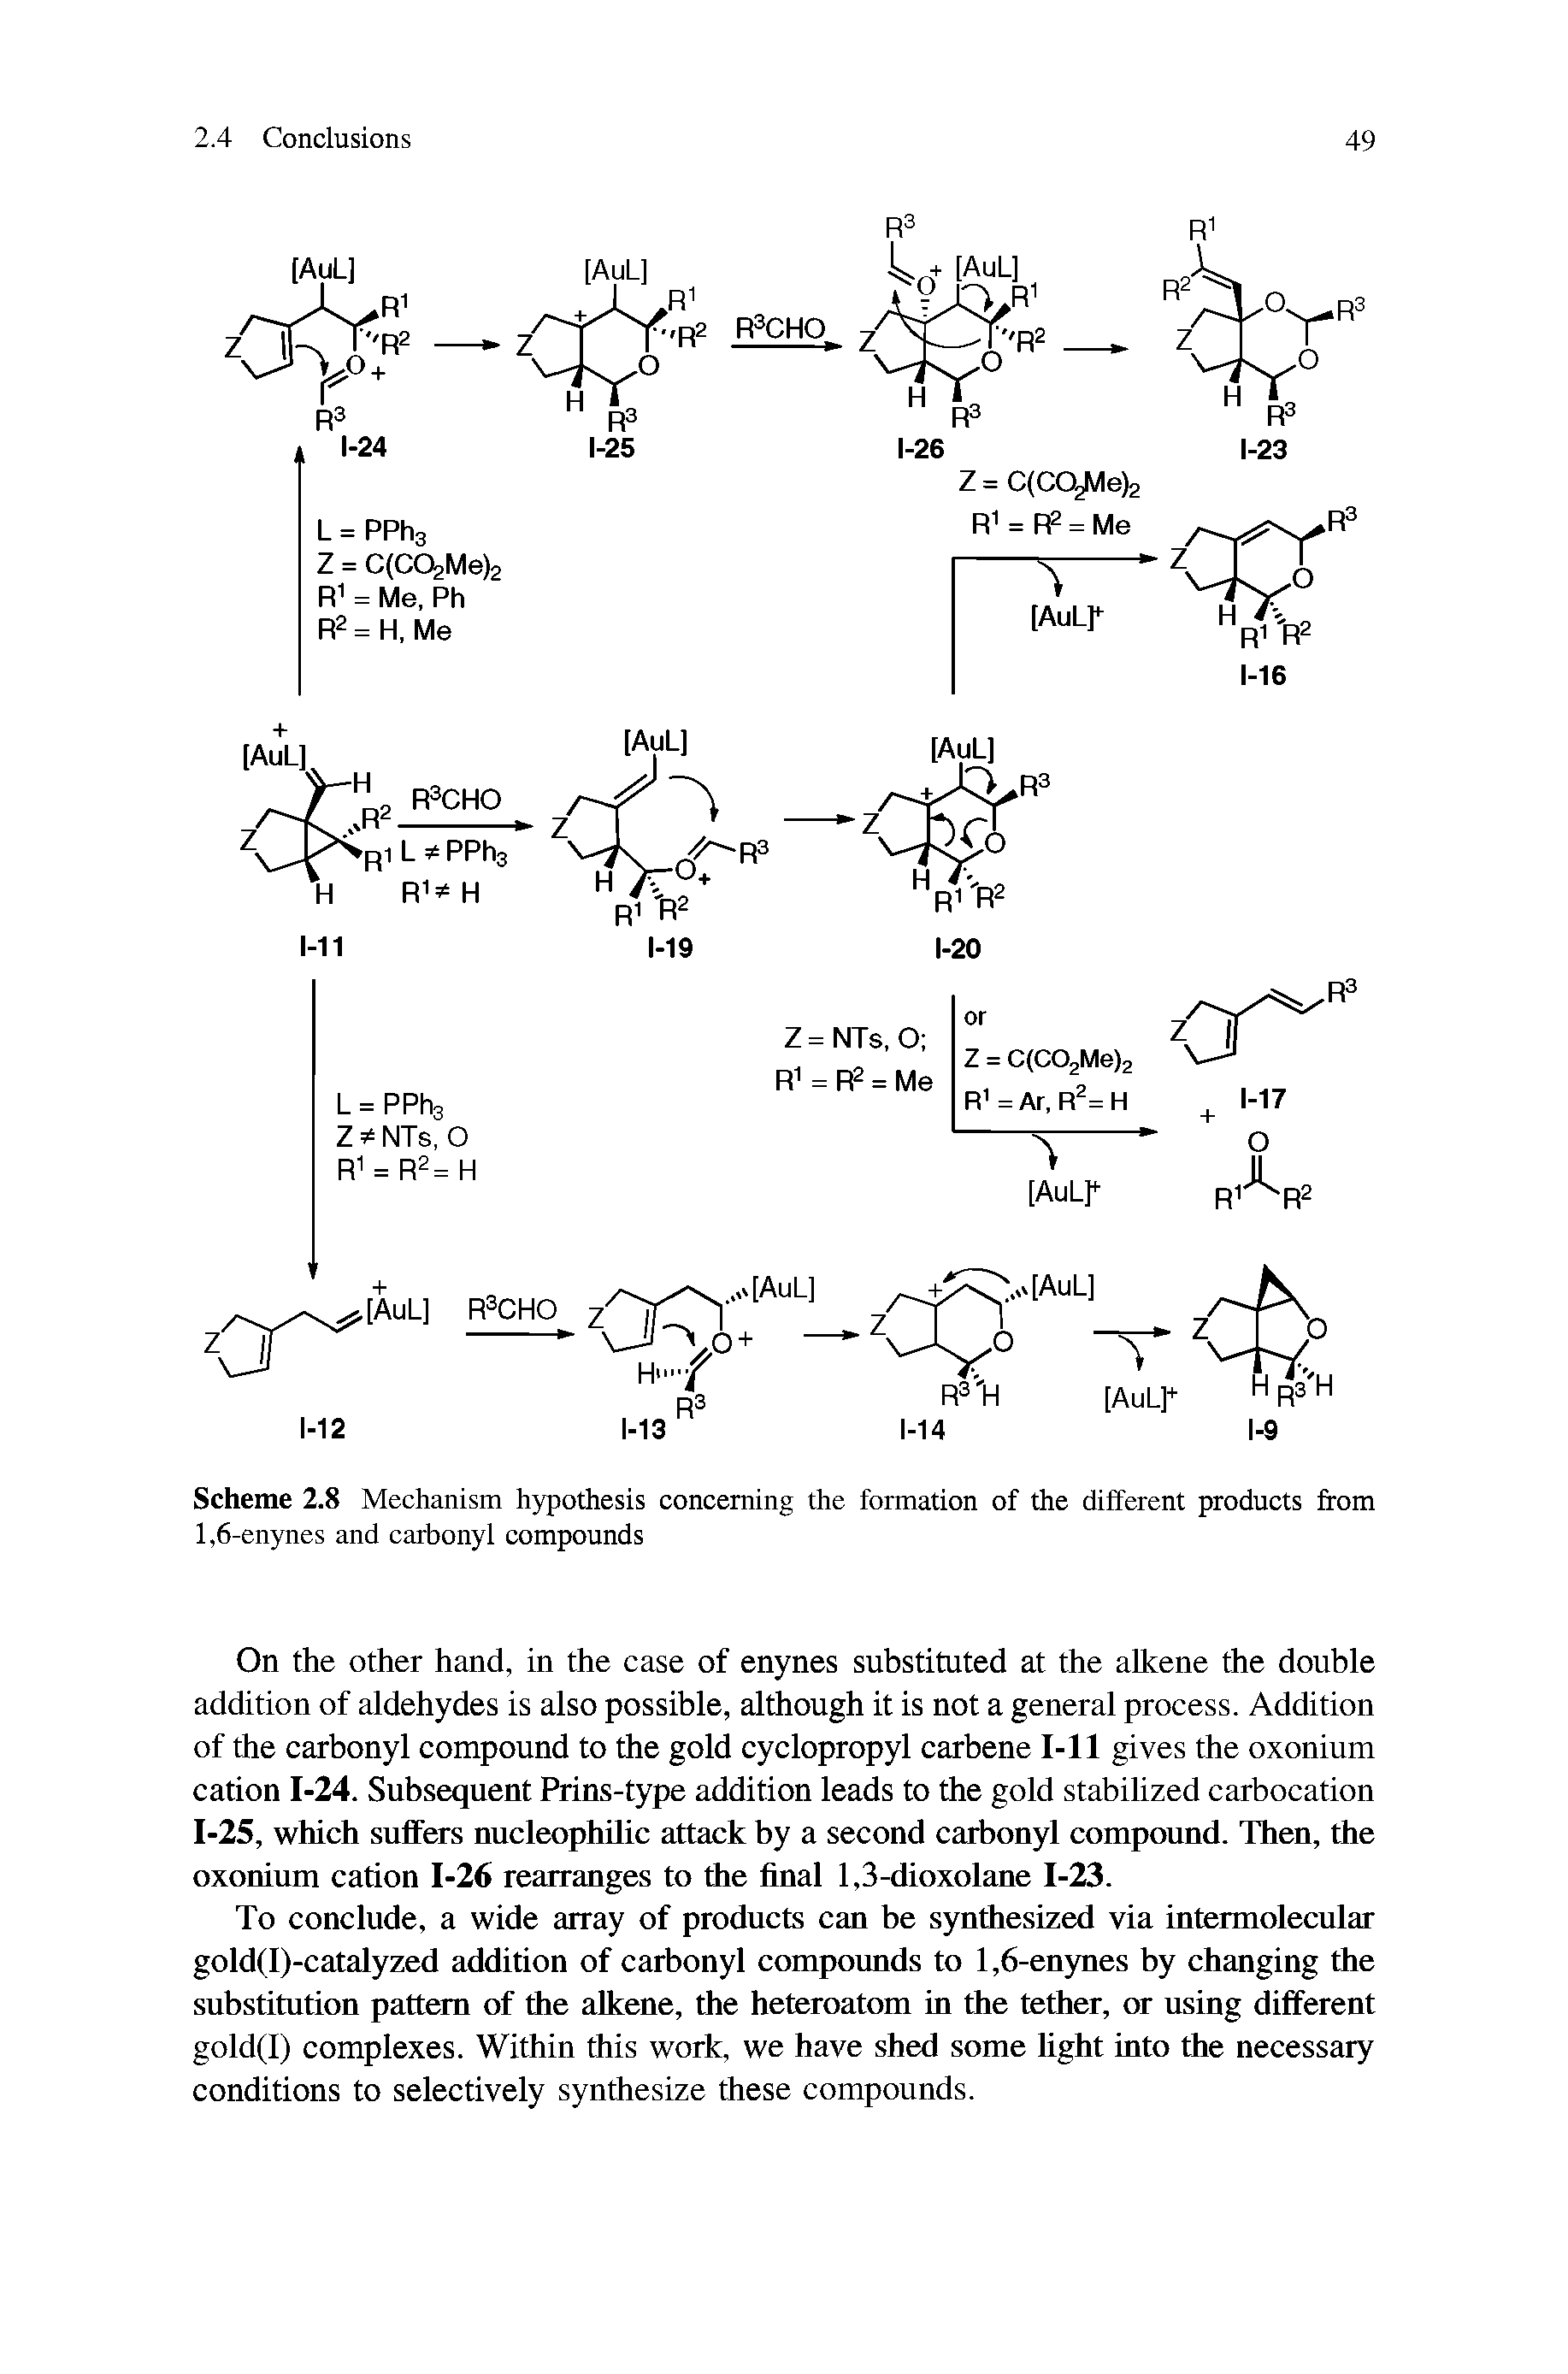 Scheme 2.8 Mechanism hypothesis concerning the formation of the different products from 1,6-enynes and carbonyl compounds...